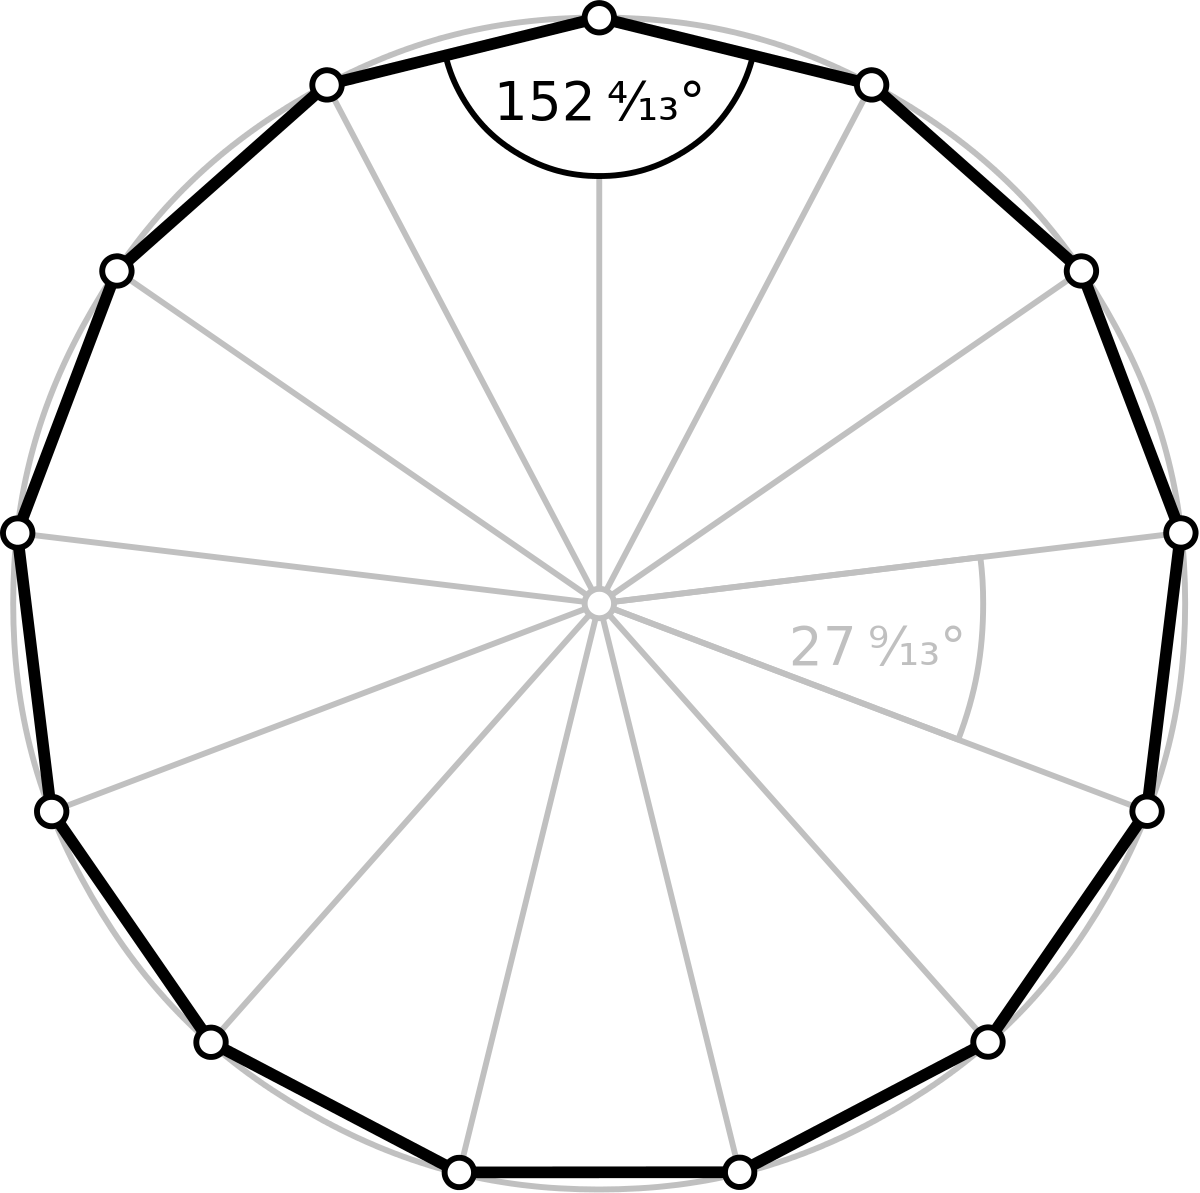 Interior And Exterior Angles Of A Polygon With 30 Sides